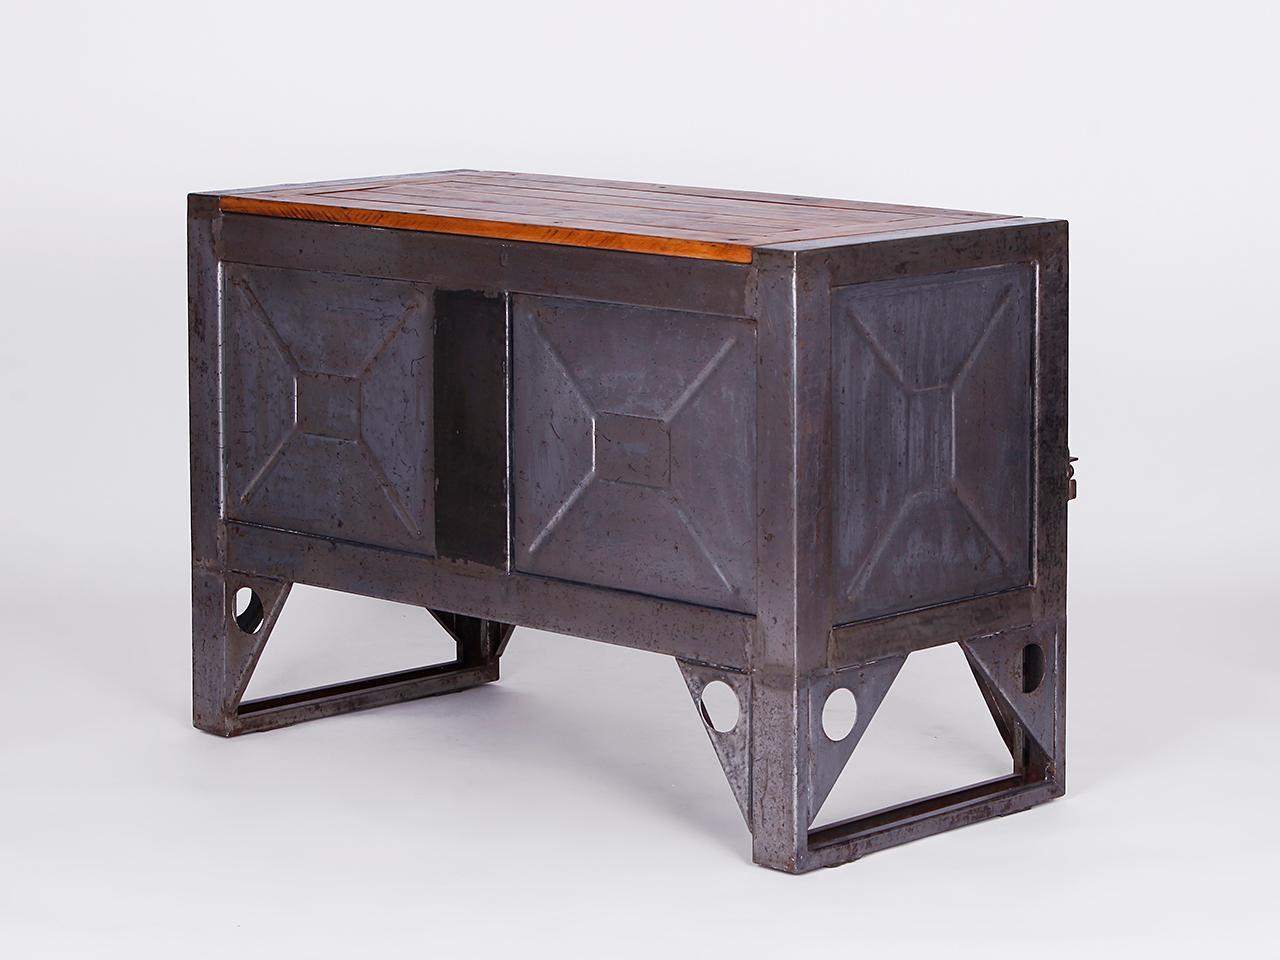 20th Century Industrial Workbench Worktable Table Sideboard from the 1940s For Sale